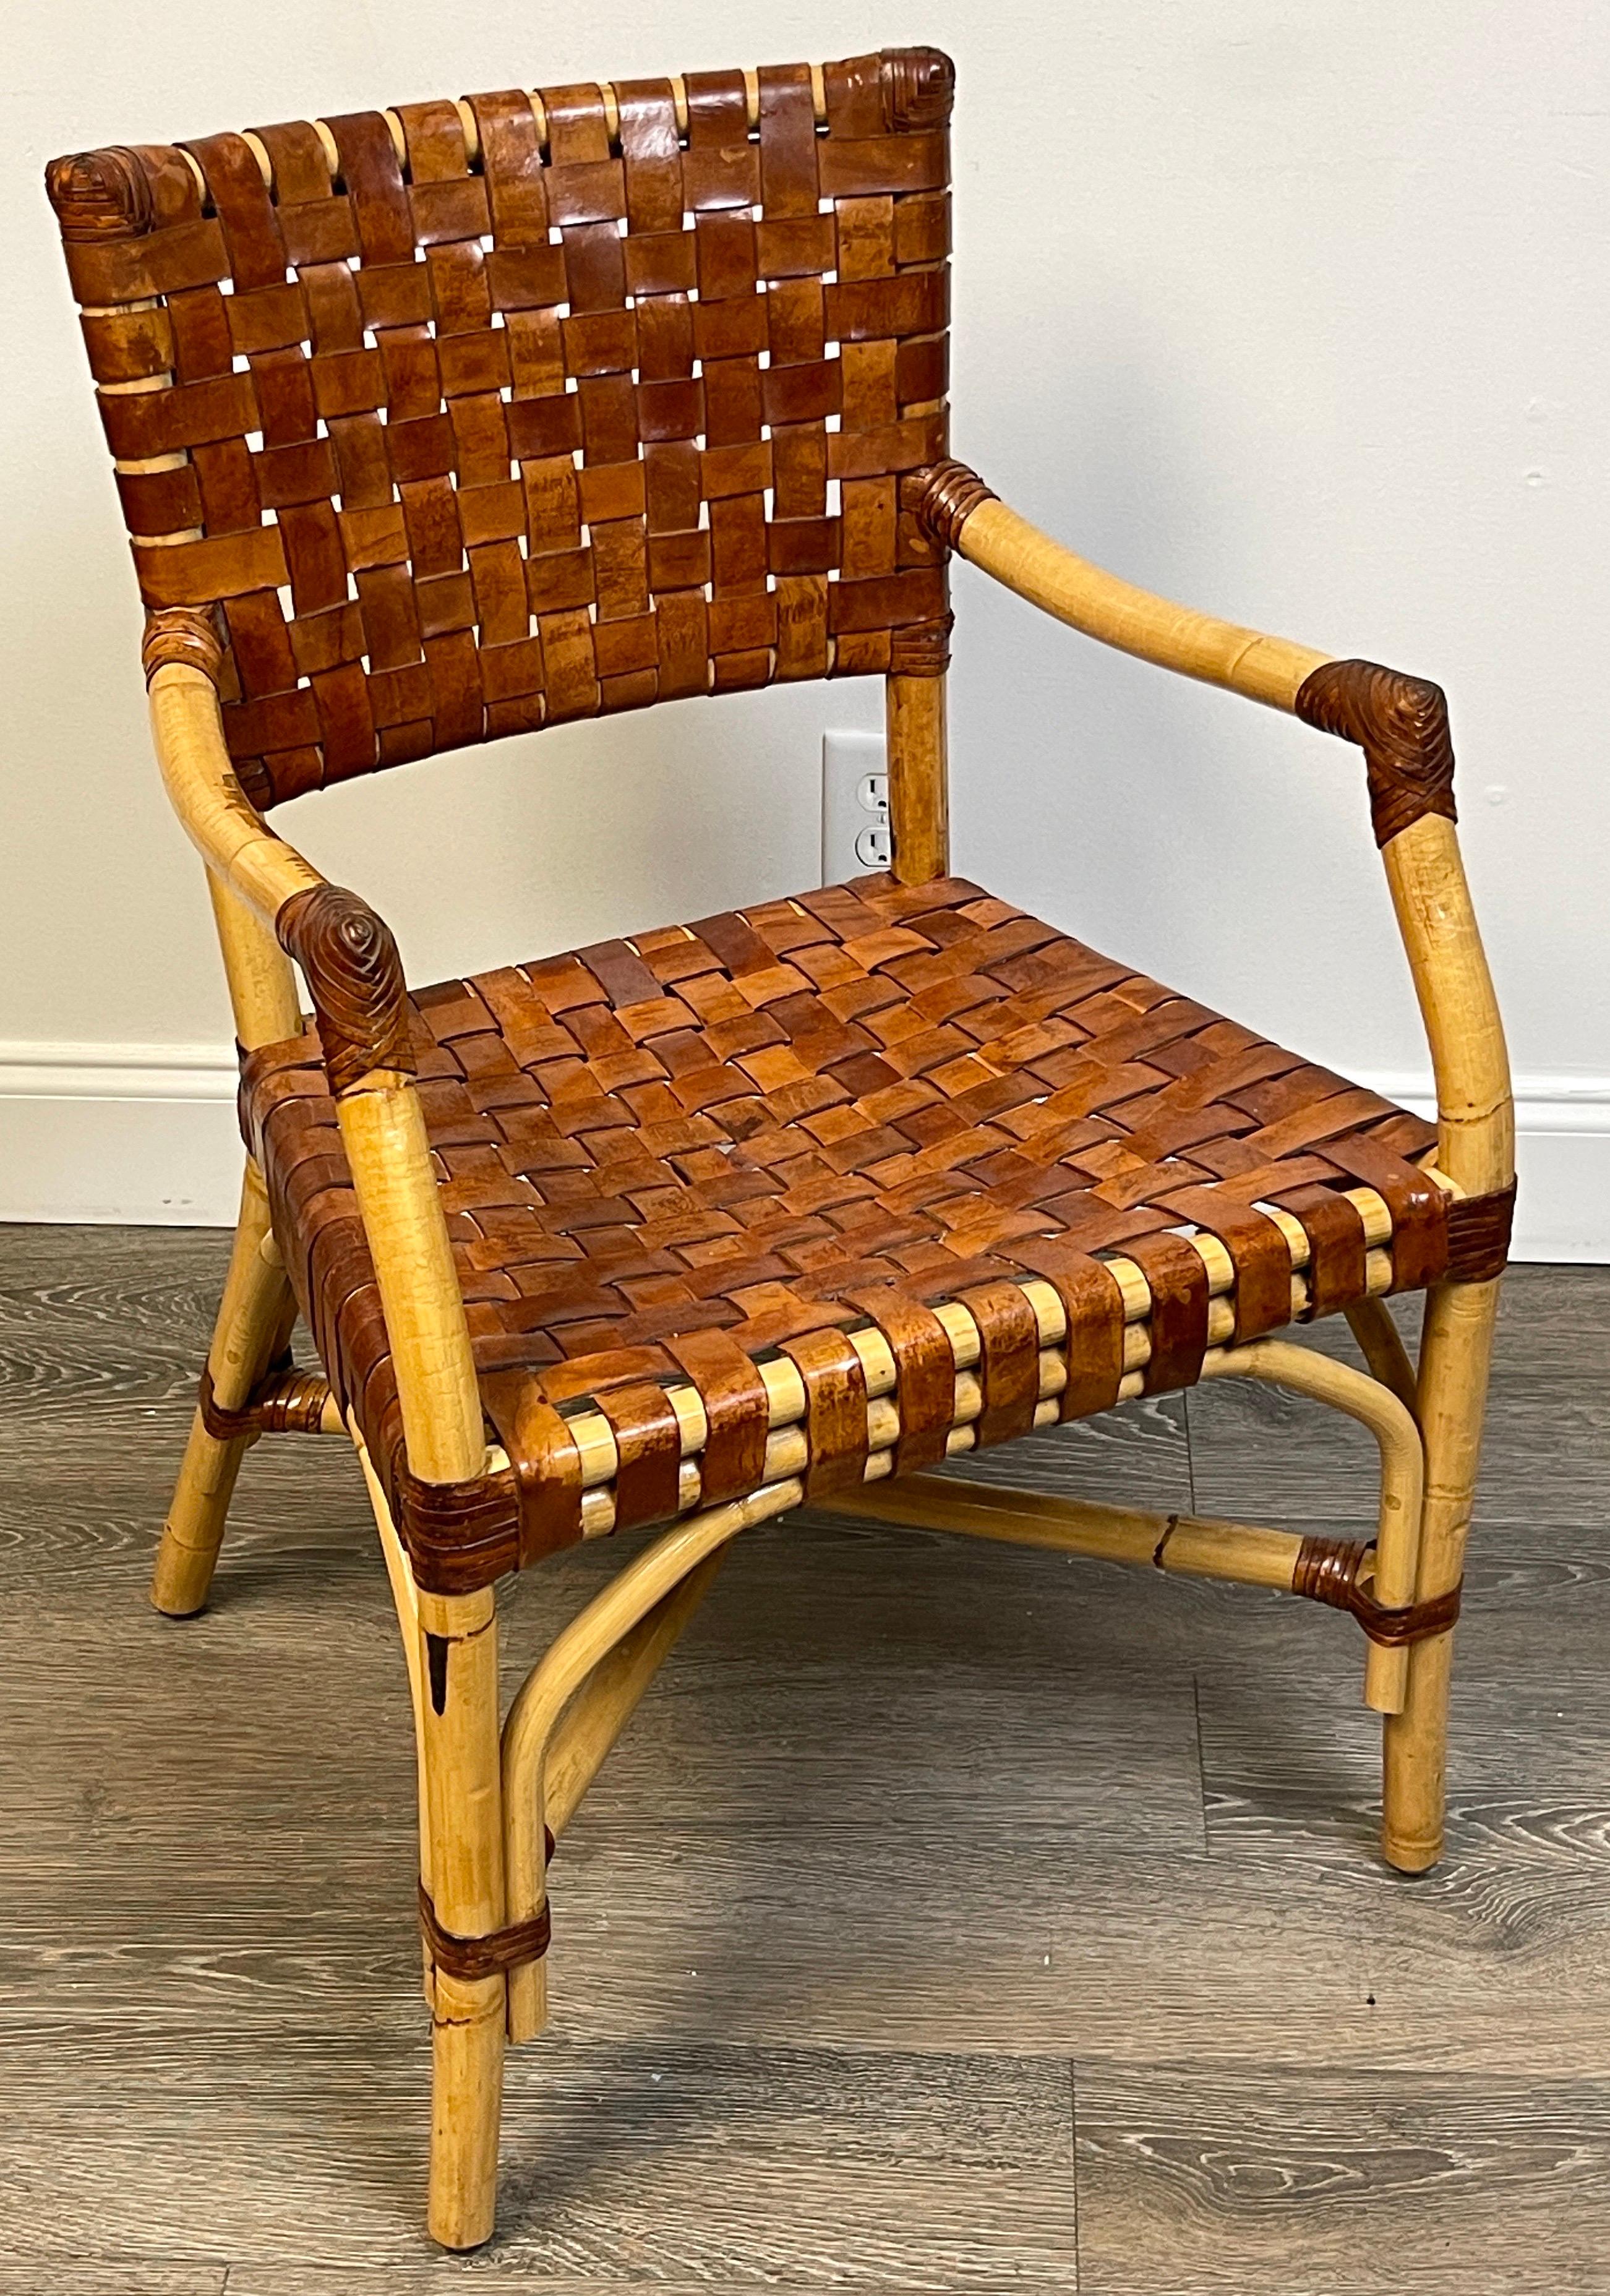 French modern bamboo & woven saddle leather armchair, 
France, Circa 1960s

A unique beautiful model, well cared for this chair retains the original woven saddle leather backrest and seat. The perfect accent or desk chair. 

The chair measures